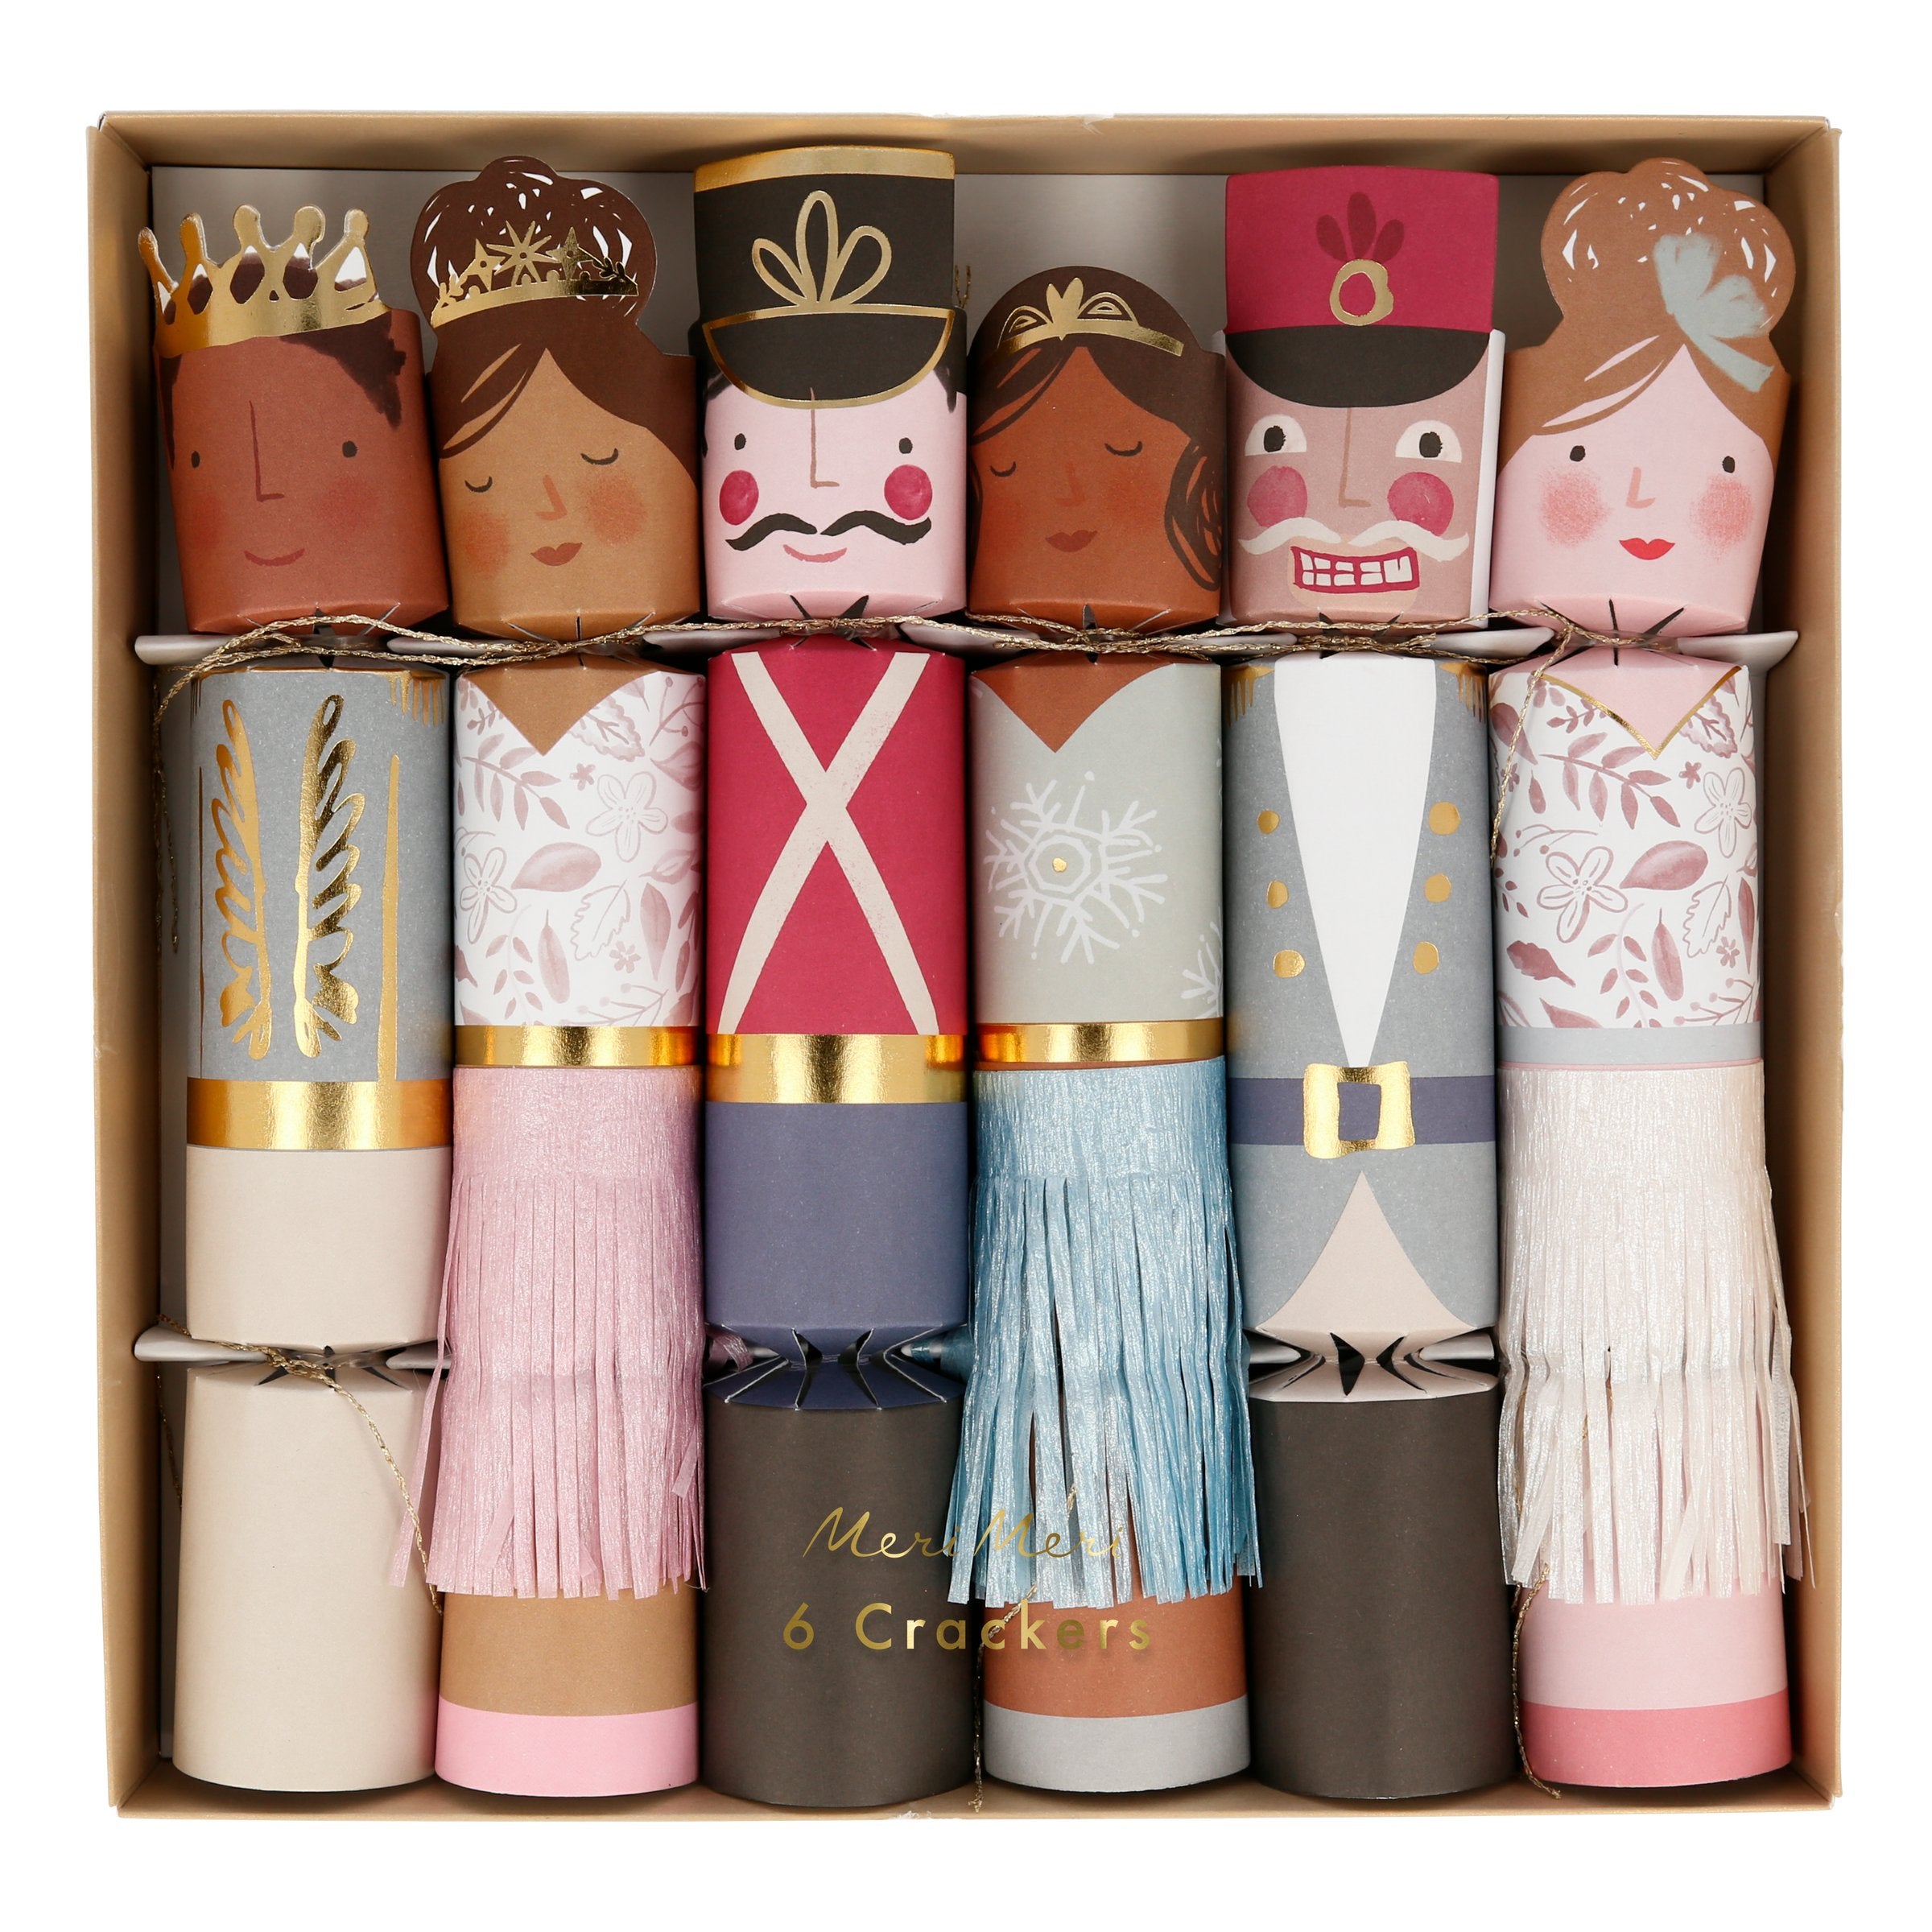 Our Nutcracker Kids Christmas crackers have delightful embellishments, and include a Christmas brooch, party hat and joke.